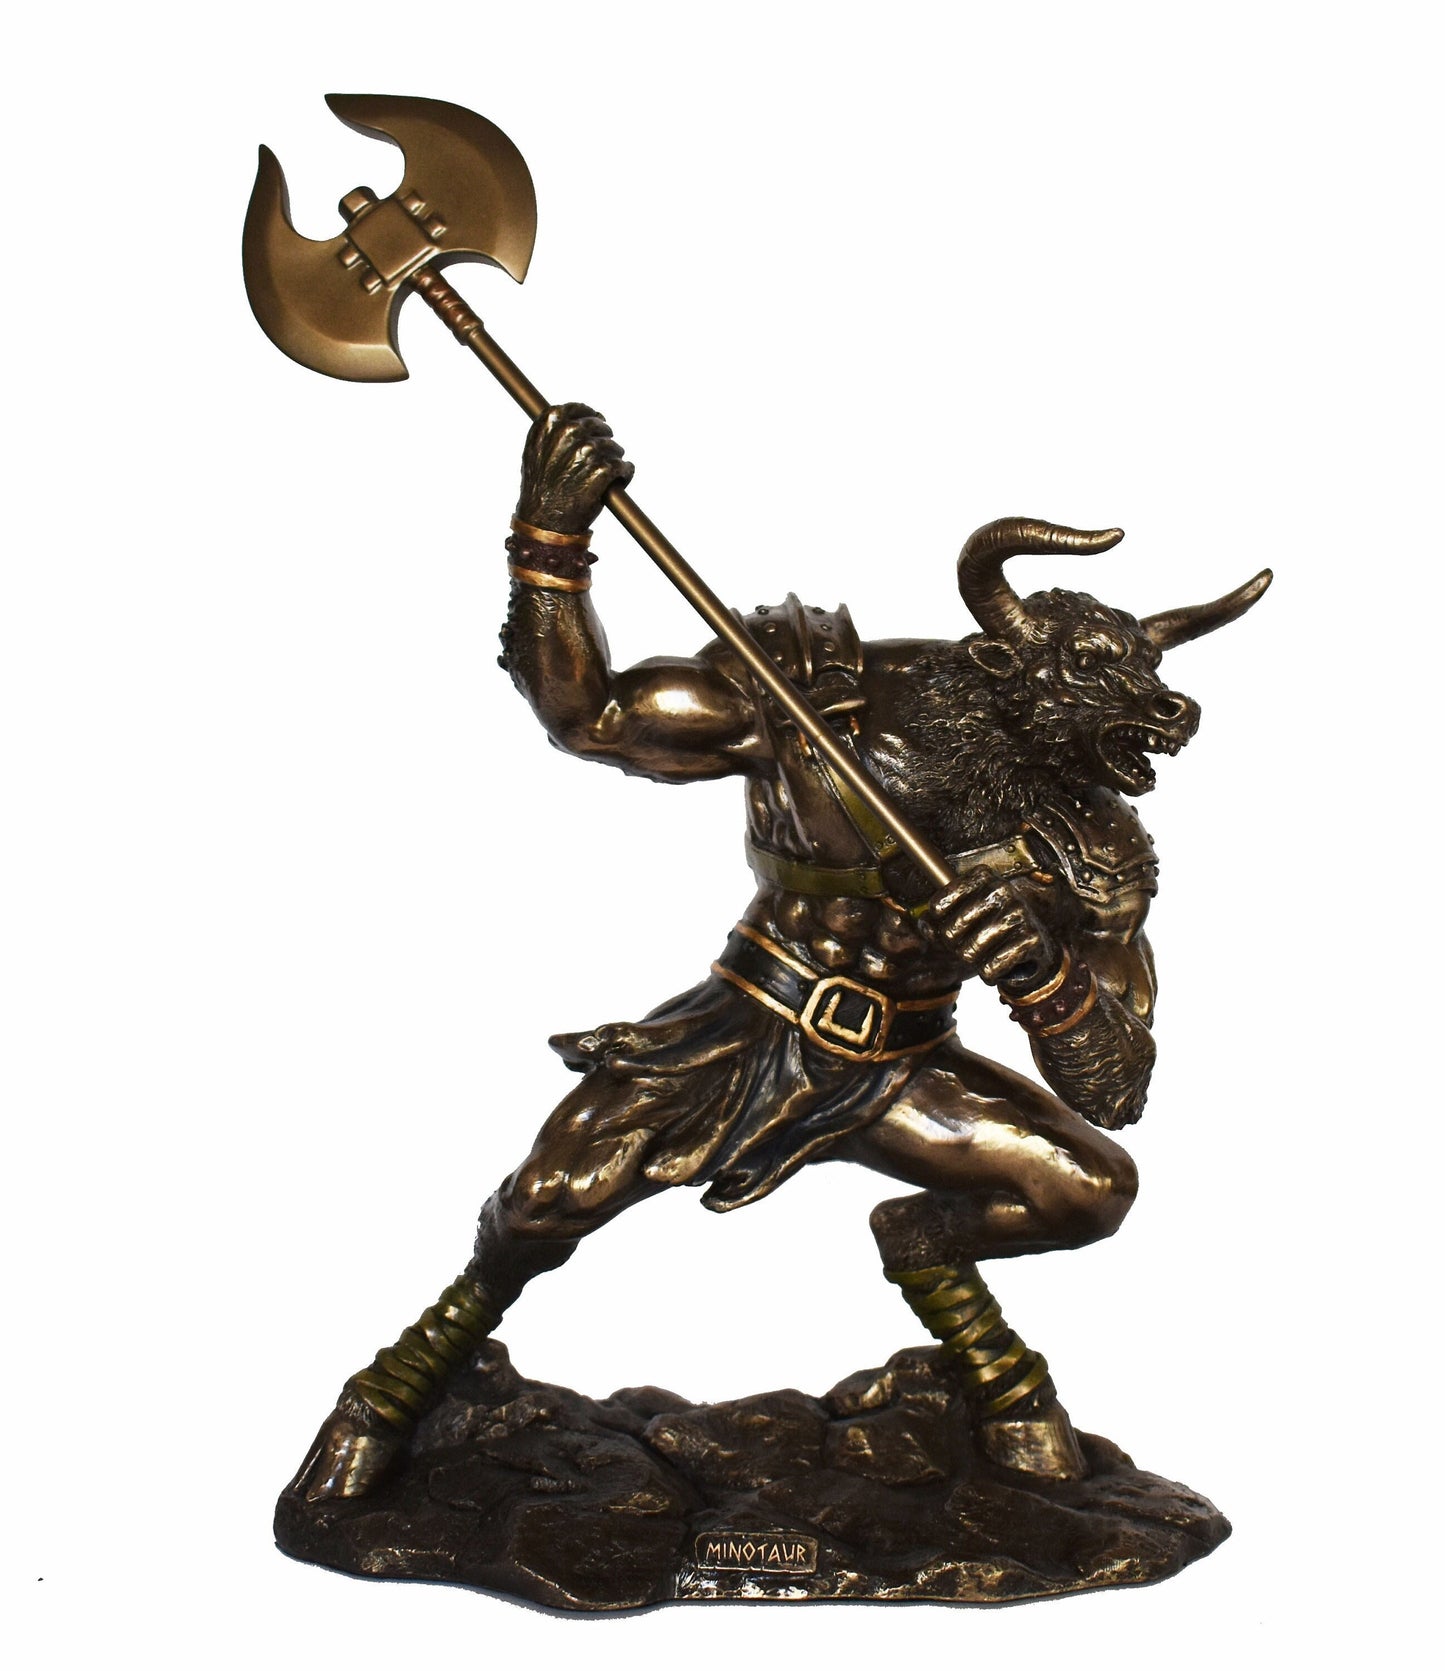 Minotaur - Mythical Creature, Half-Man, Half-Bull - Fierce and Very Strong - Labyrinth, King Minos, Crete, Theseus - Cold Cast Bronze Resin